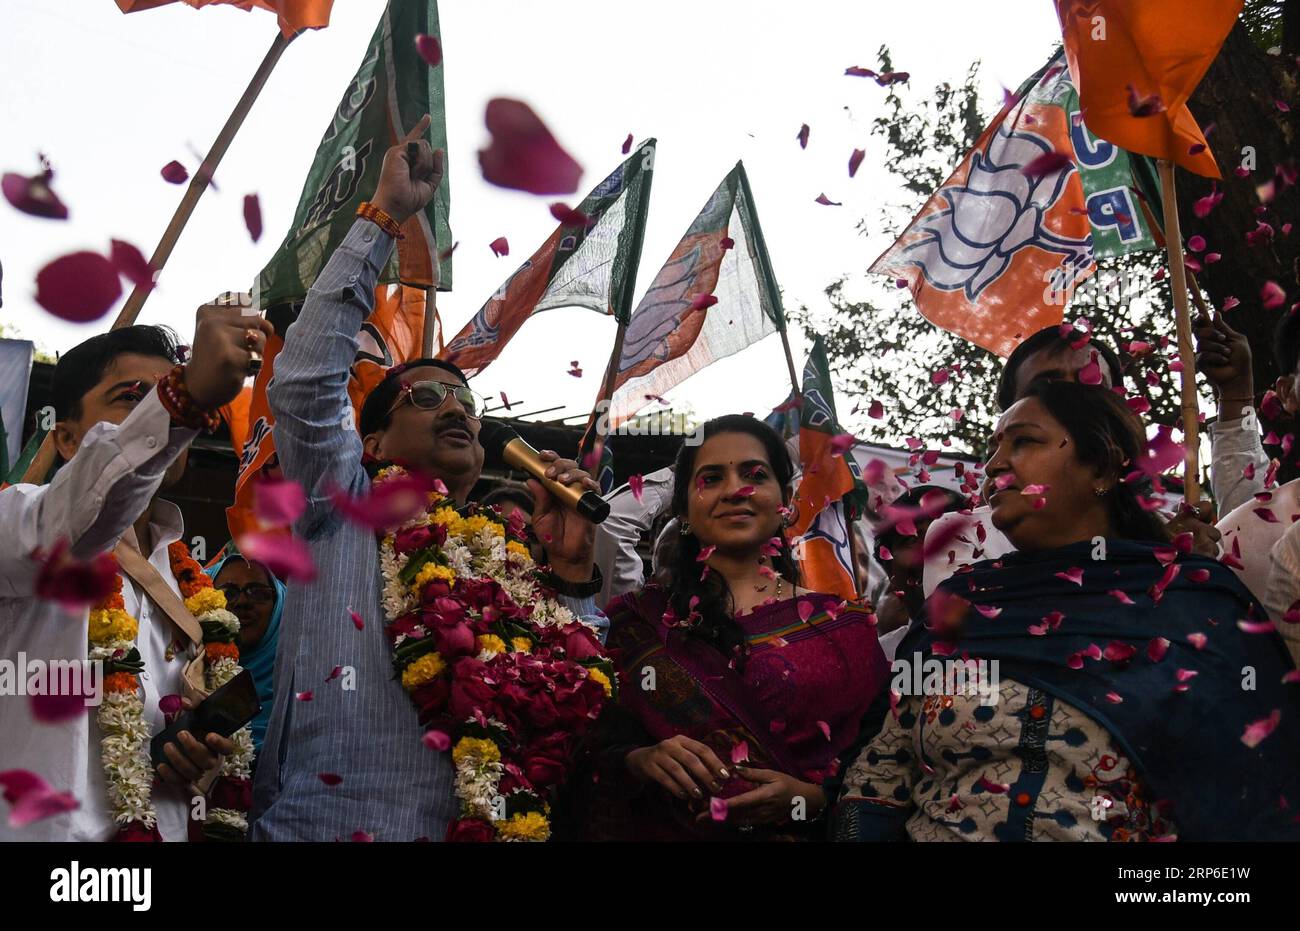 (190110) -- MUMBAI, Jan. 10, 2019 -- Members of the Bharatiya Janata Party celebrate the establishment of quota for poor upper-caste people in government jobs ahead of national elections, in Mumbai, India, Jan. 10, 2019. ) INDIA-MUMBAI-BHARATIYA JANATA PARTY CELEBRATION Stringer PUBLICATIONxNOTxINxCHN Stock Photo